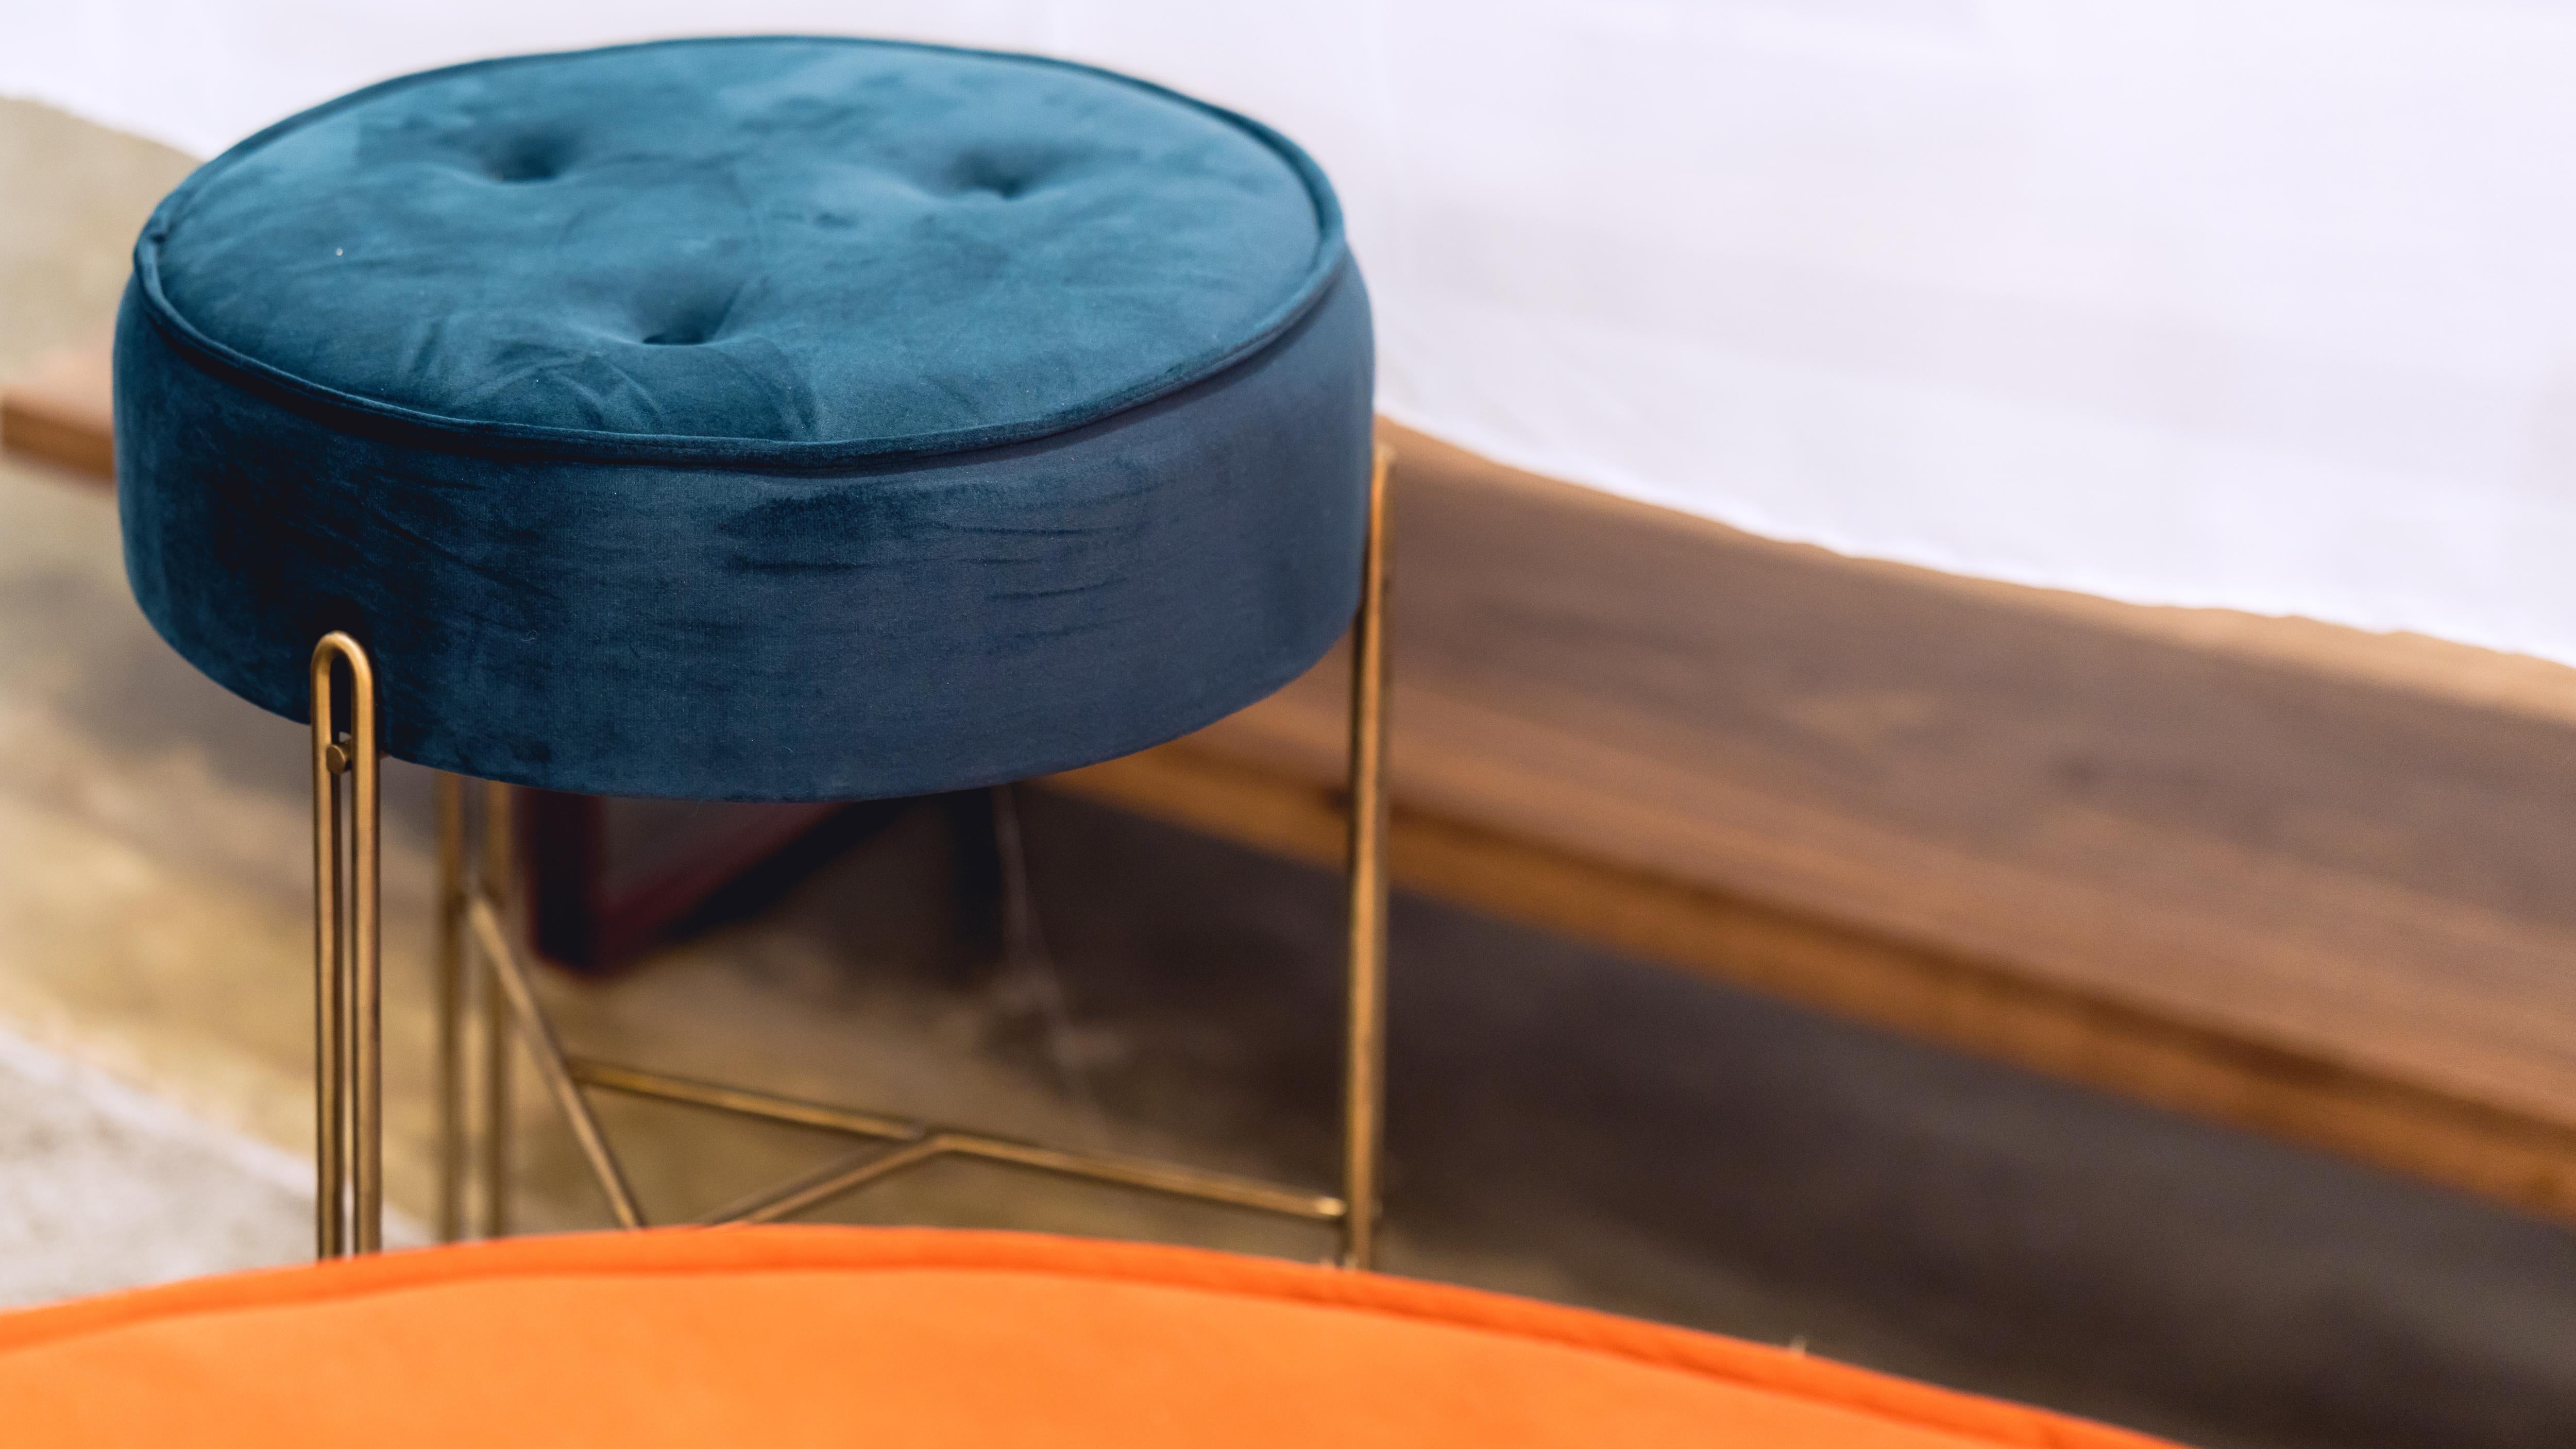 Upholstered Cushioned Stool / Ottoman in Velvet Linen or Leather by Filipe Ramos In New Condition For Sale In Sao Paulo, Sao Paulo